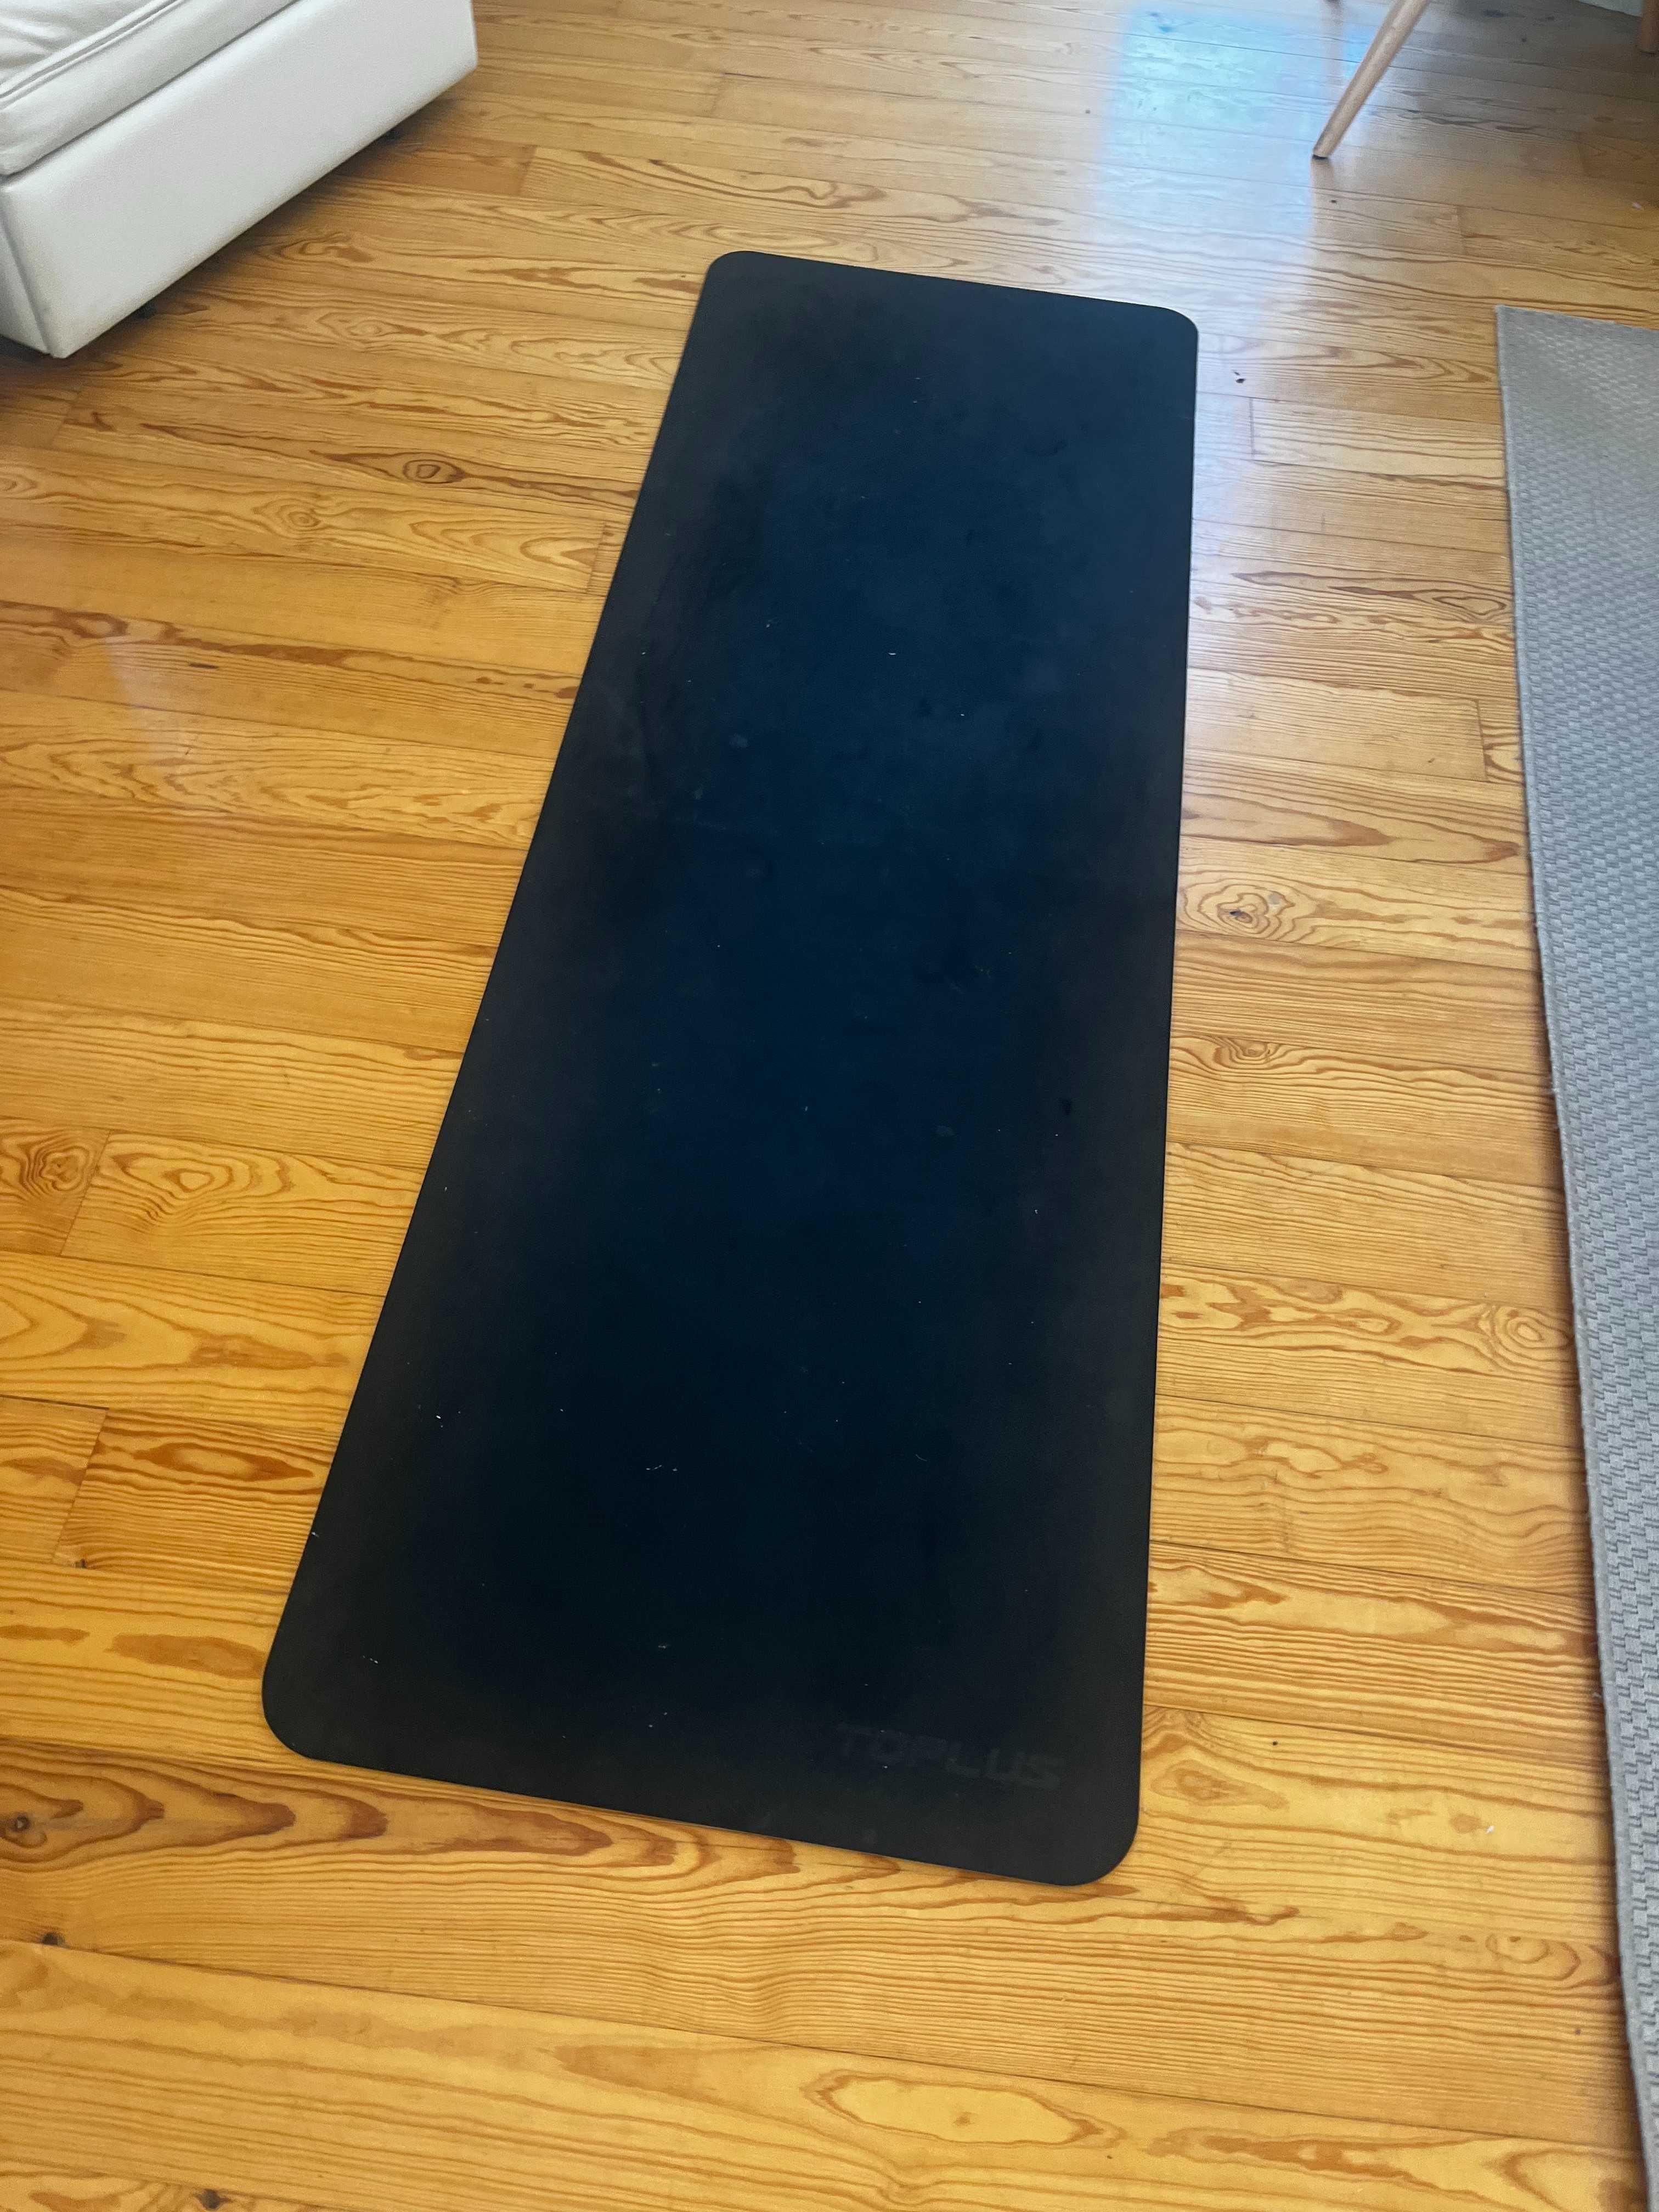 [FIRESALE] Pre-Loved Tranquility Pro Yoga Mat